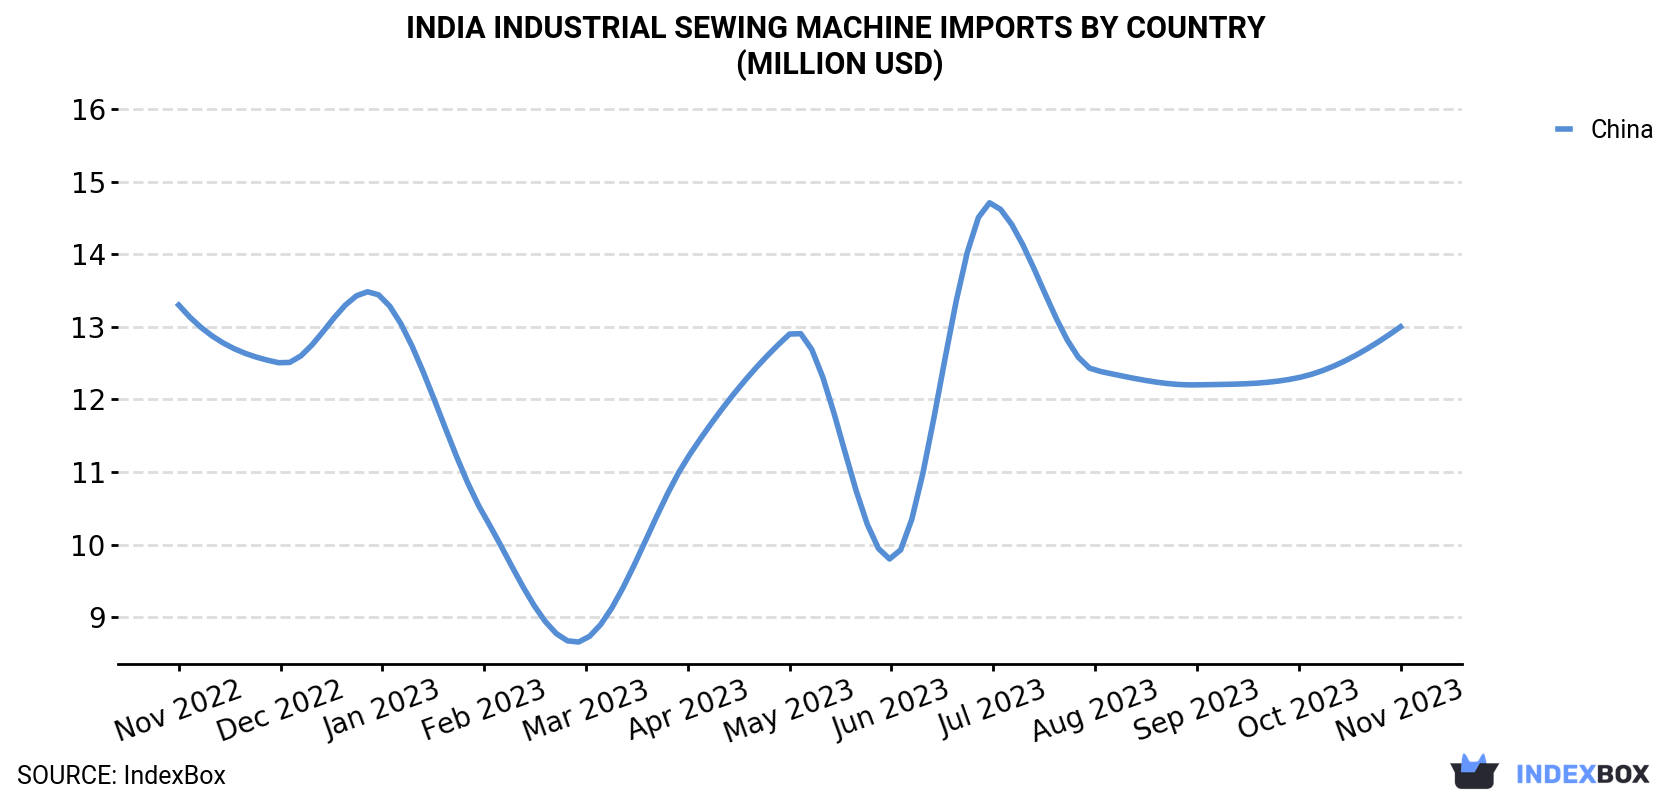 India Industrial Sewing Machine Imports By Country (Million USD)